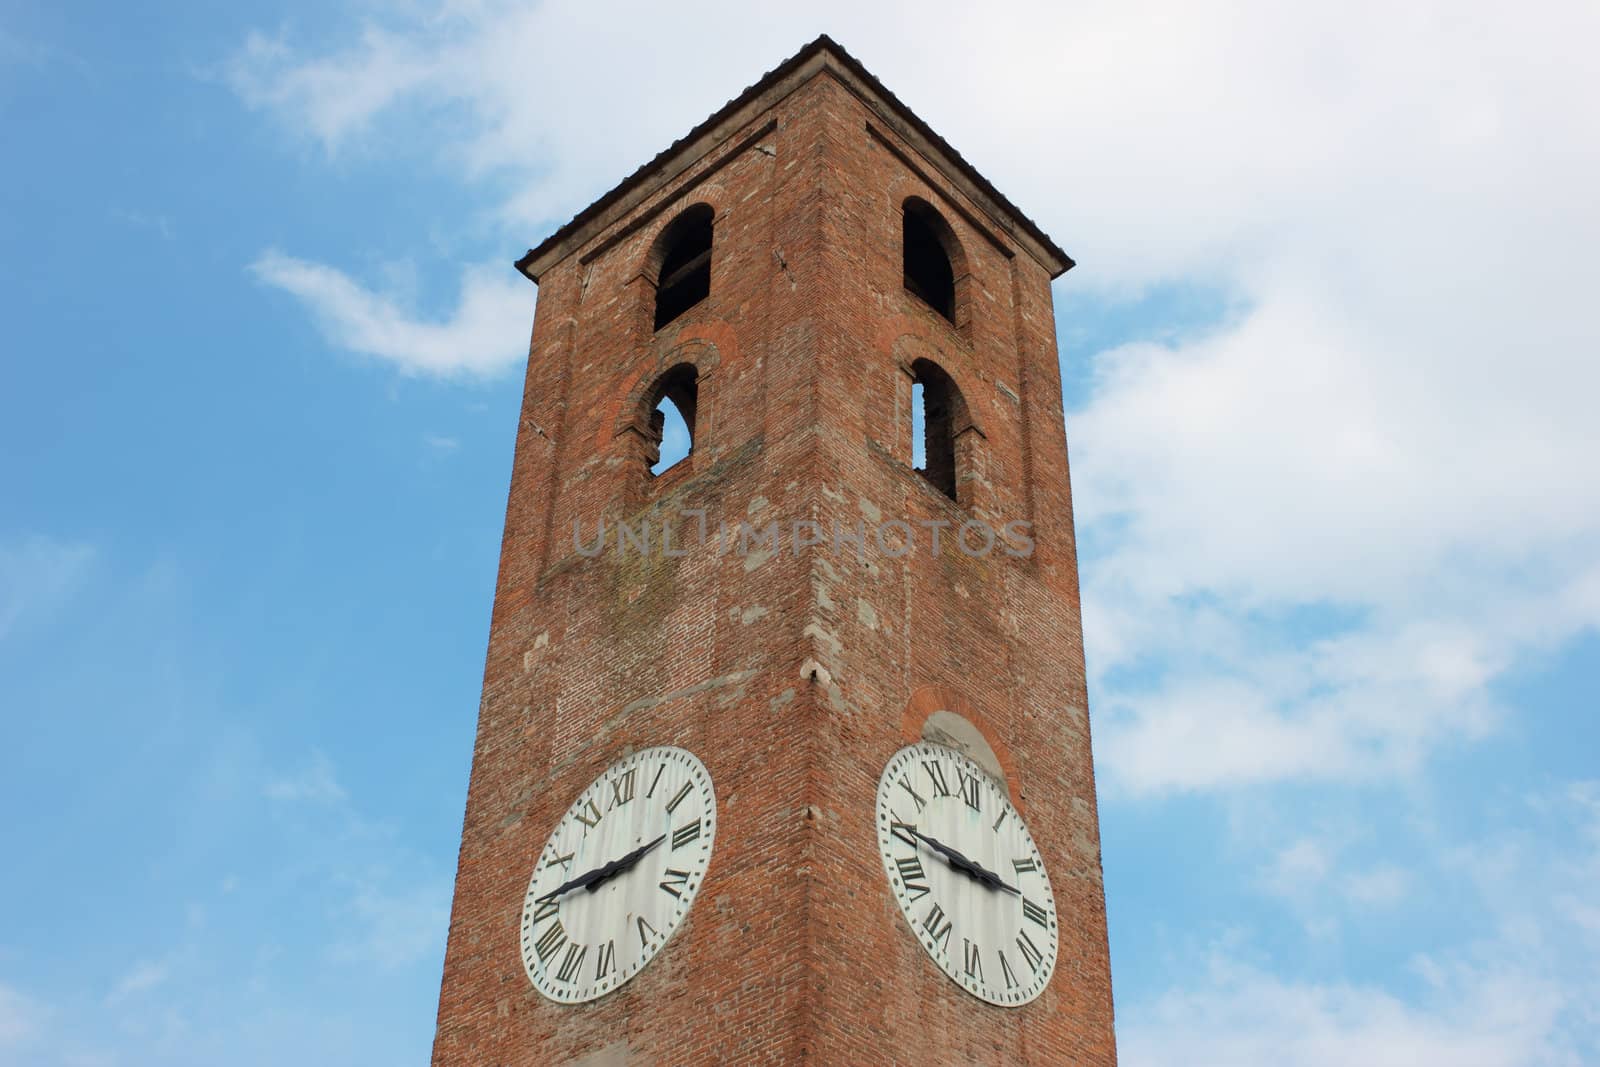 Antique Clock Tower on Blue Sky Background by kirilart